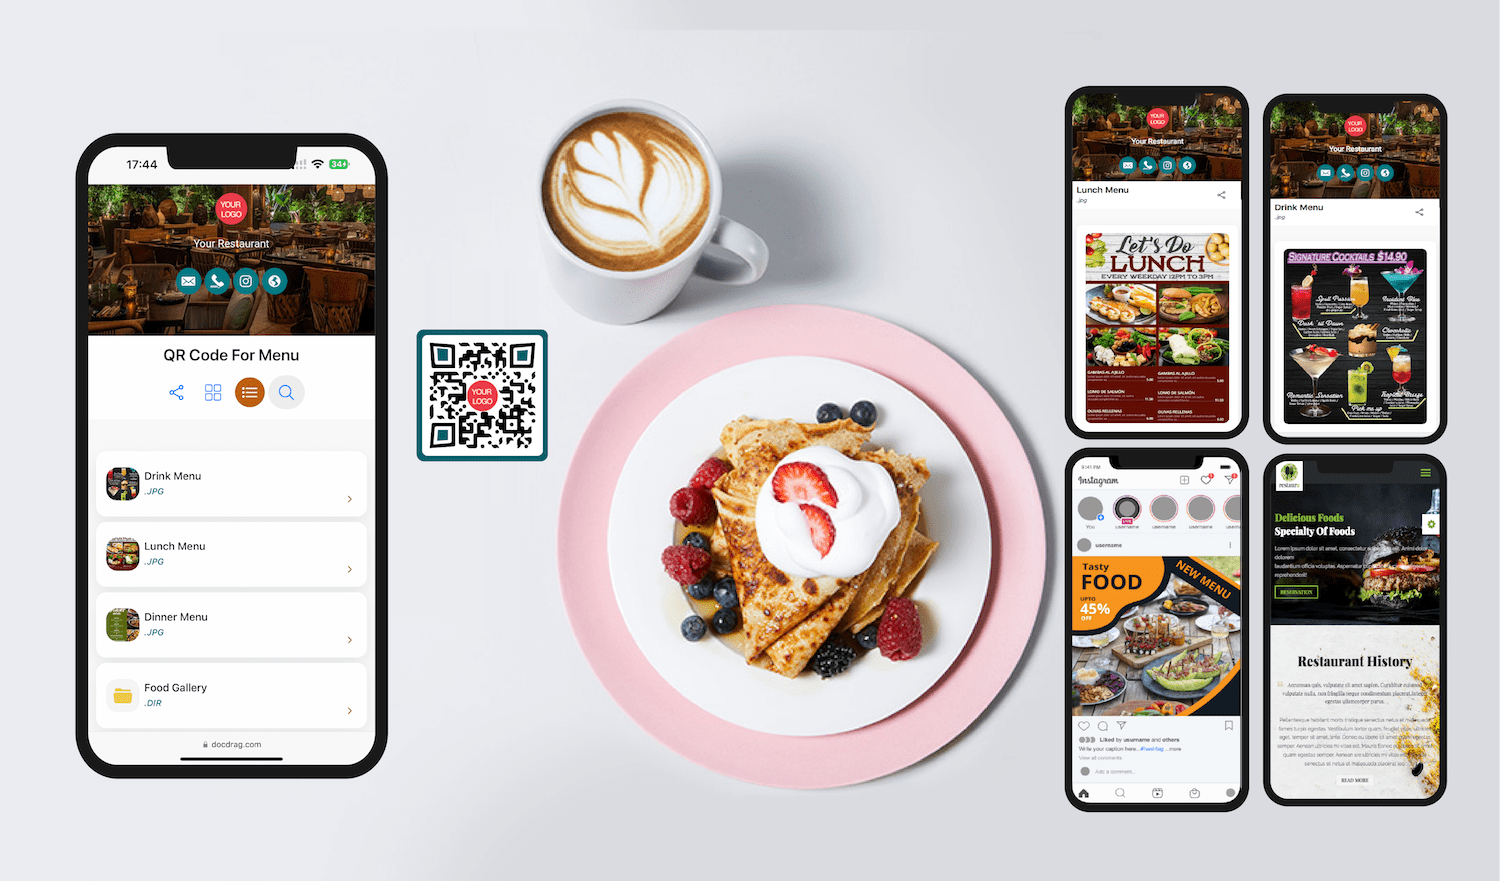 All in one qr code for menu